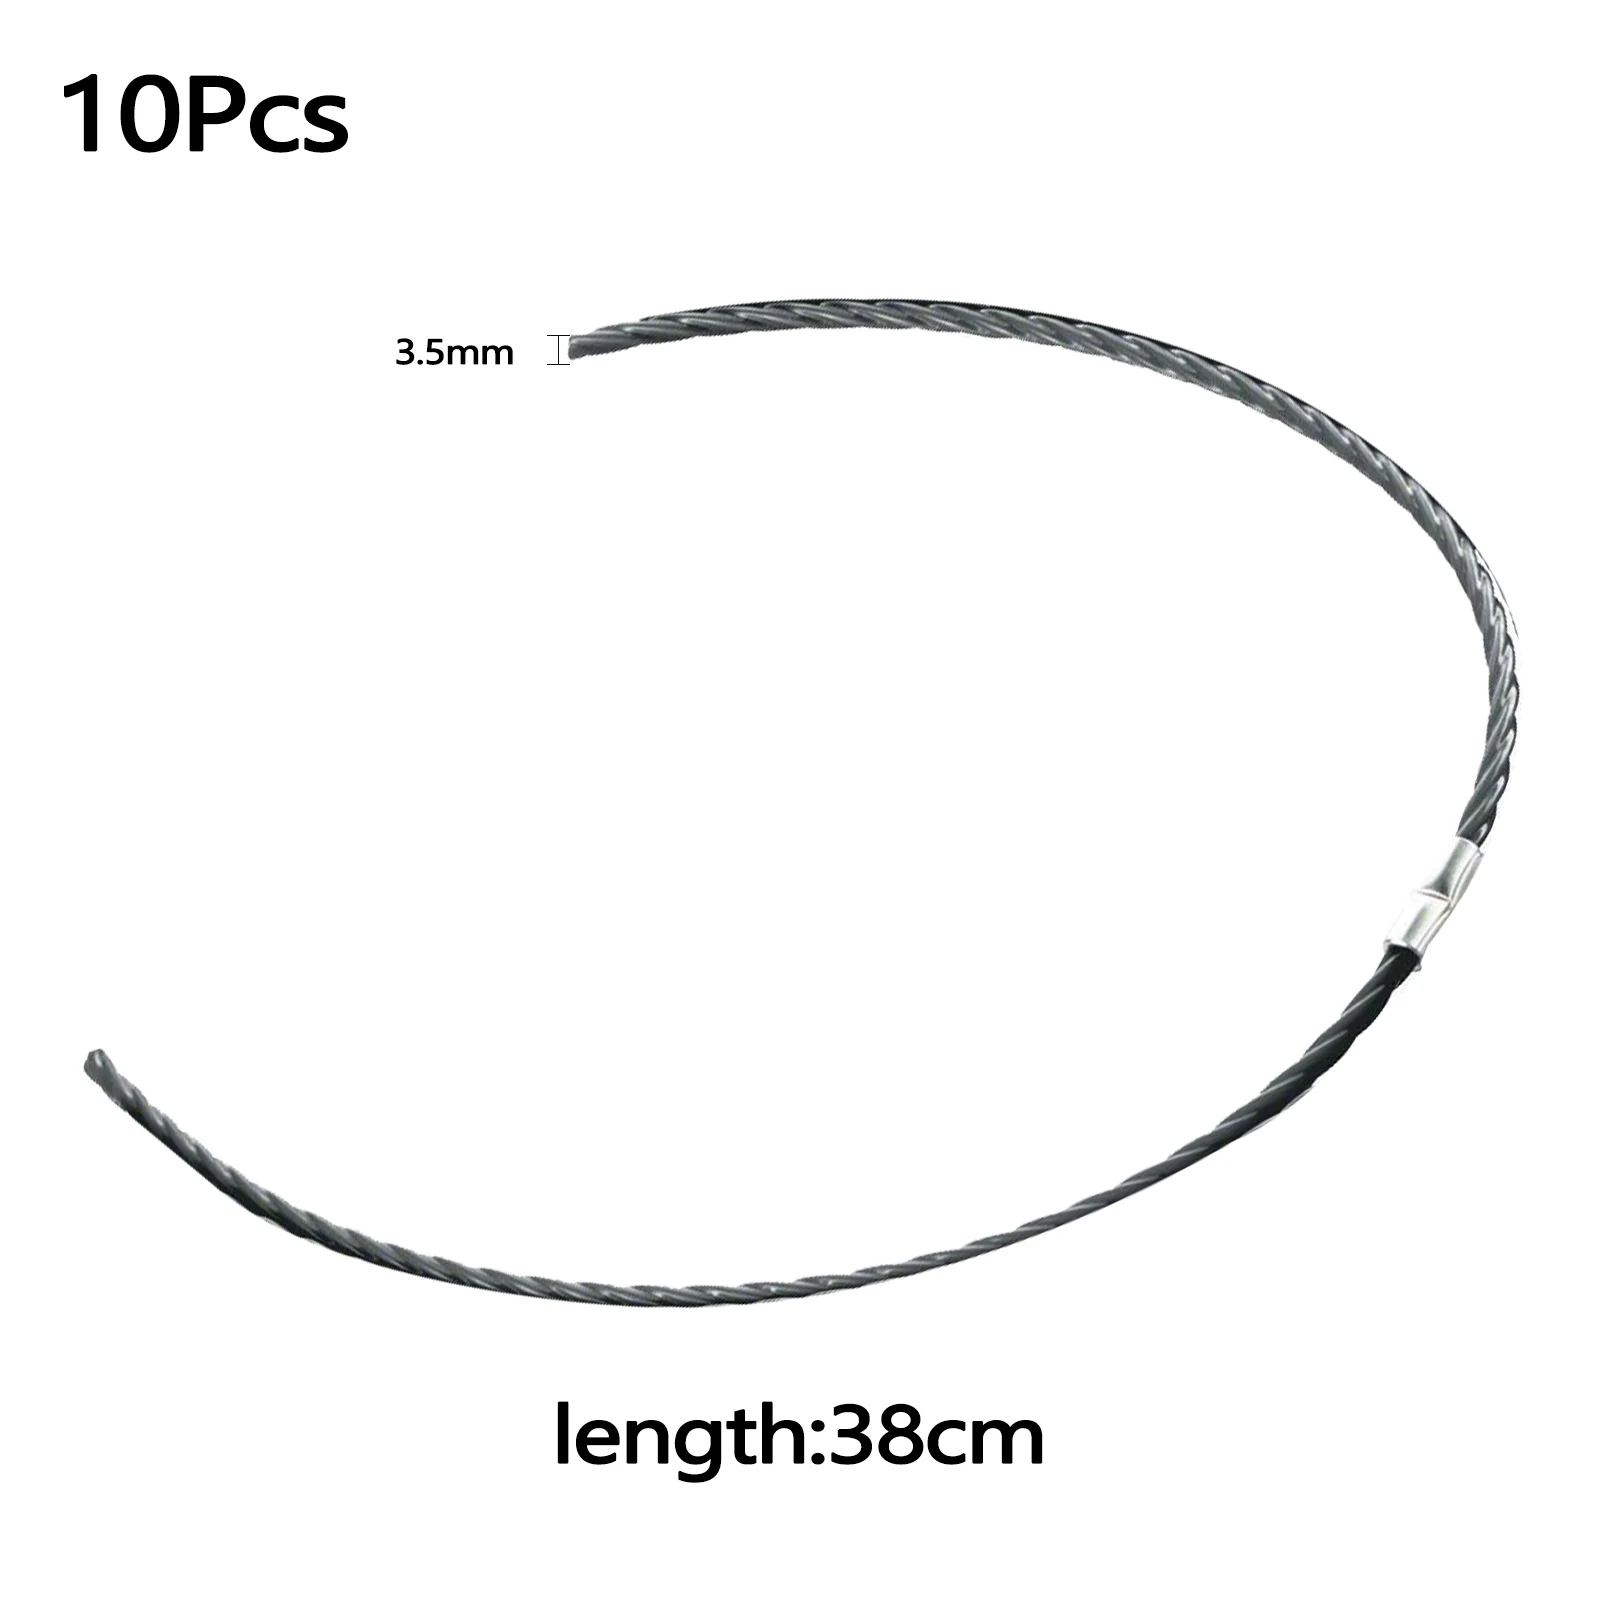 

10Pcs Brush Cutter/Grass Trimmer Lines F016800431 For BOSCH AFS 23-37 For Agriculture Landscaping Home Gardening Horticulture